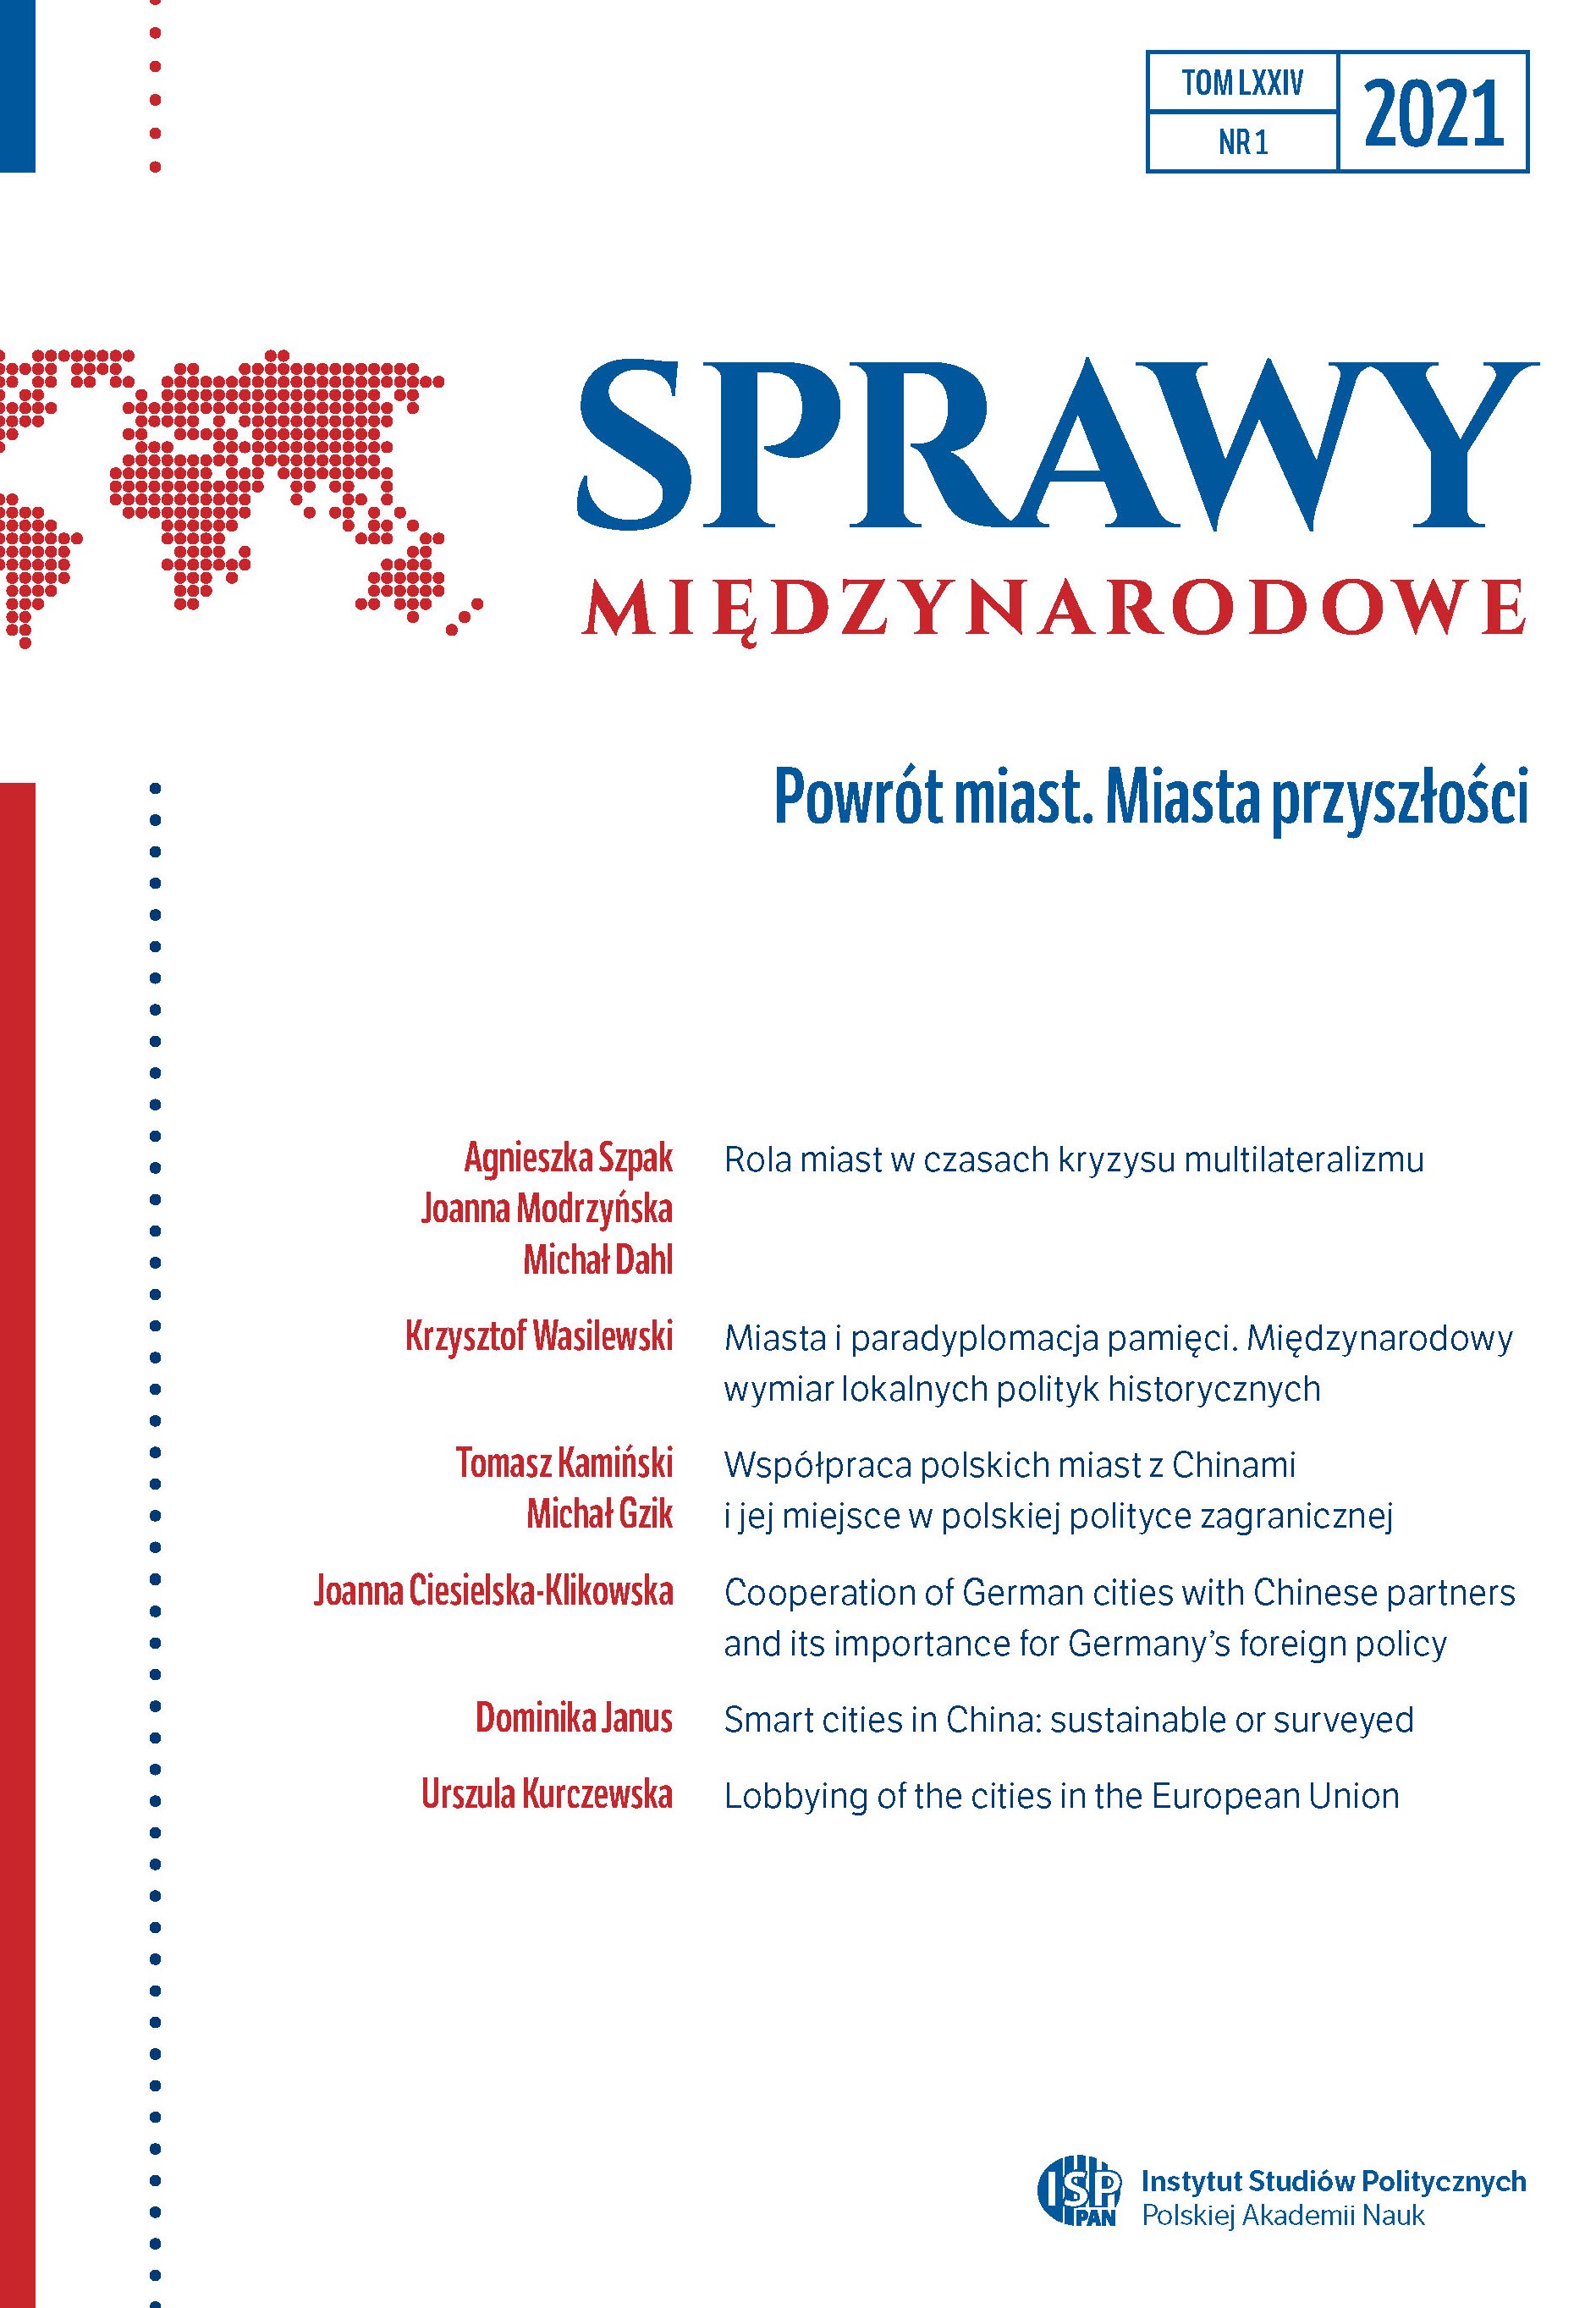 Countering frames: how Warsaw and Budapest mayors communicated their international activity